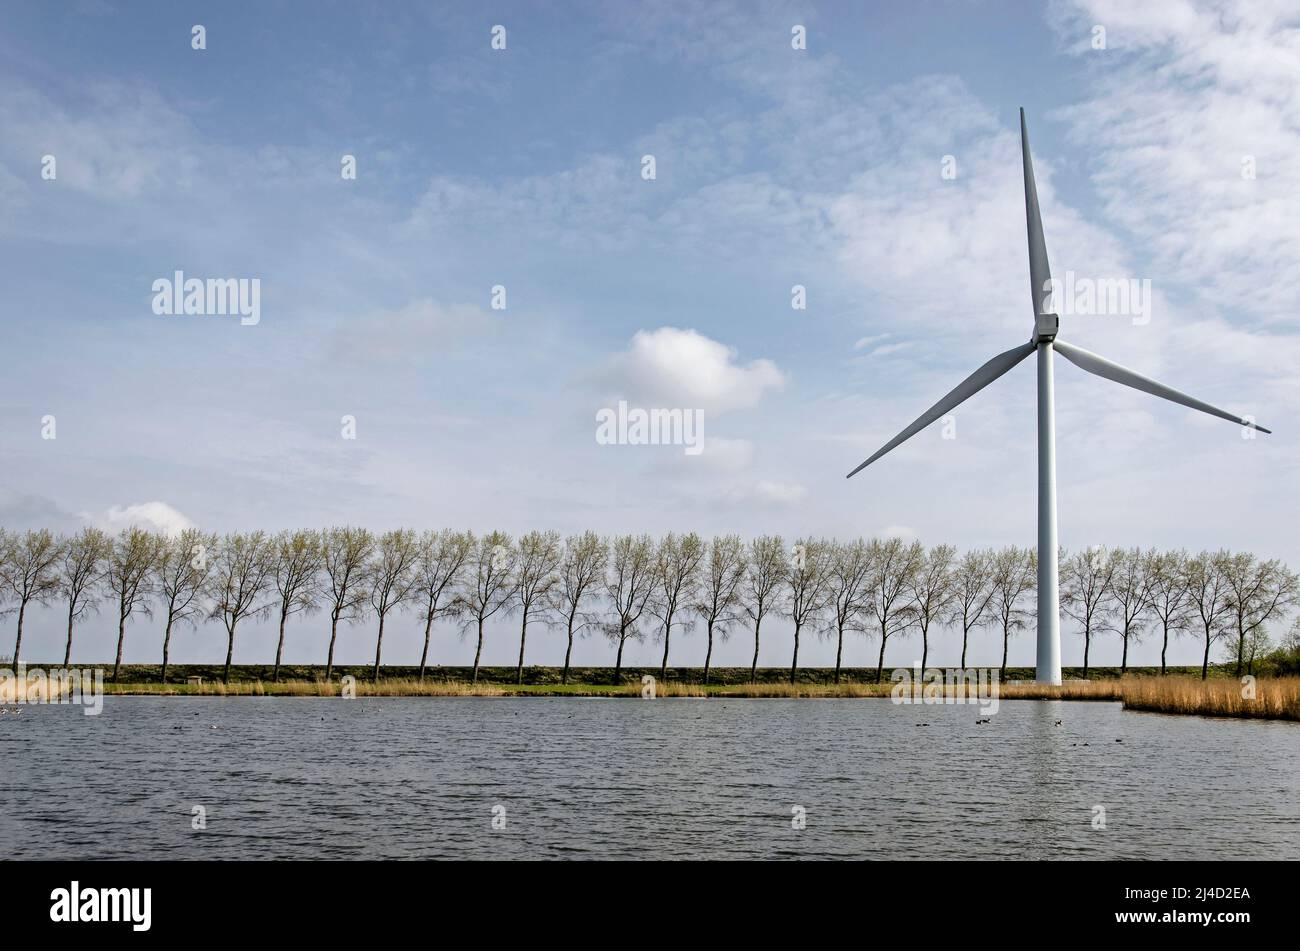 Middelharnis, The Netherlands, March 30, 2022: view across a lake towards a dike with a wind turbine and a row of trees all bend in the same direction Stock Photo